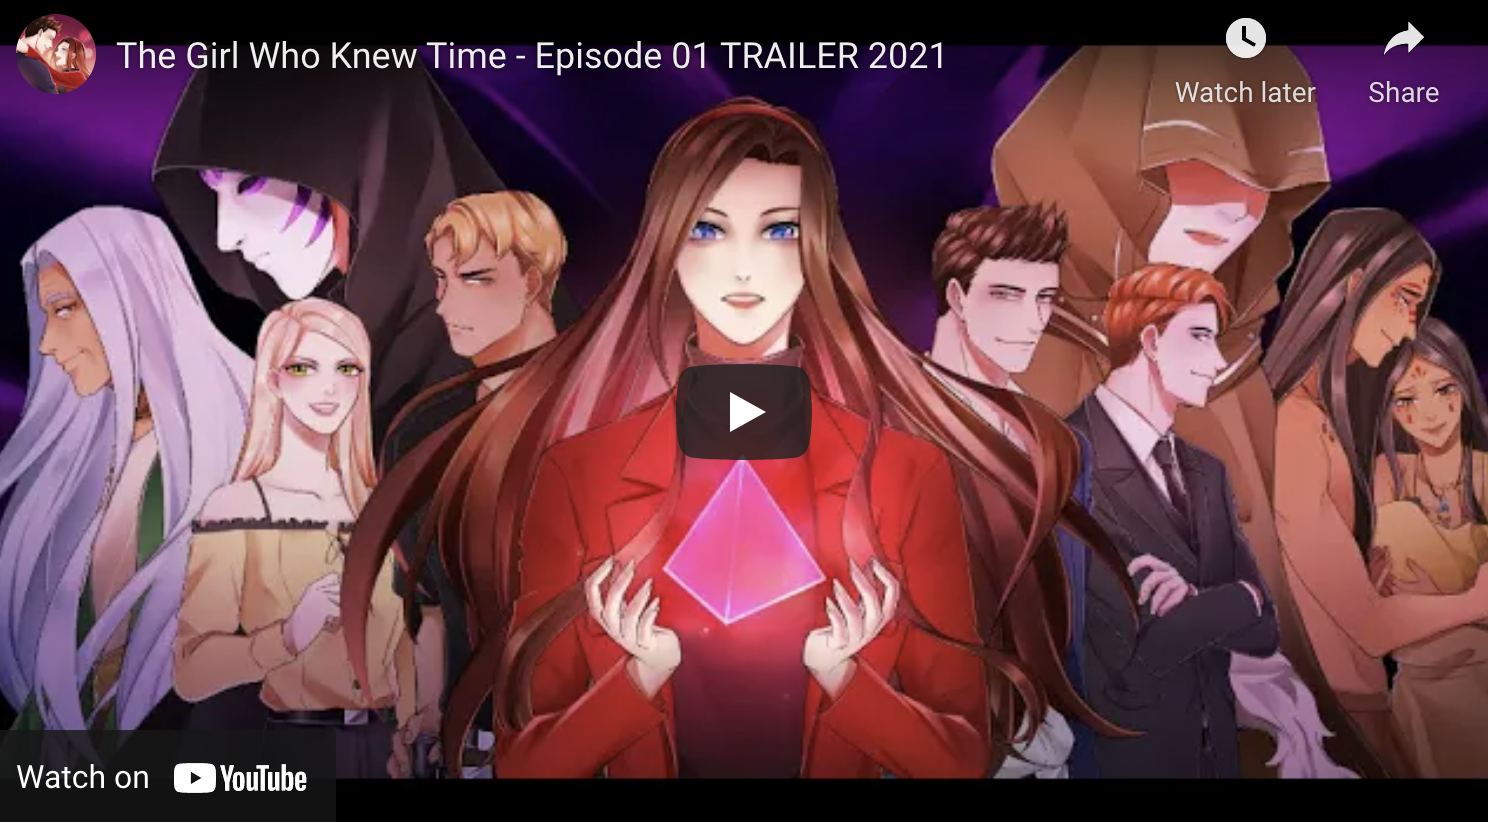 Watch The Girl Who Knew Time Episode 01 Trailer